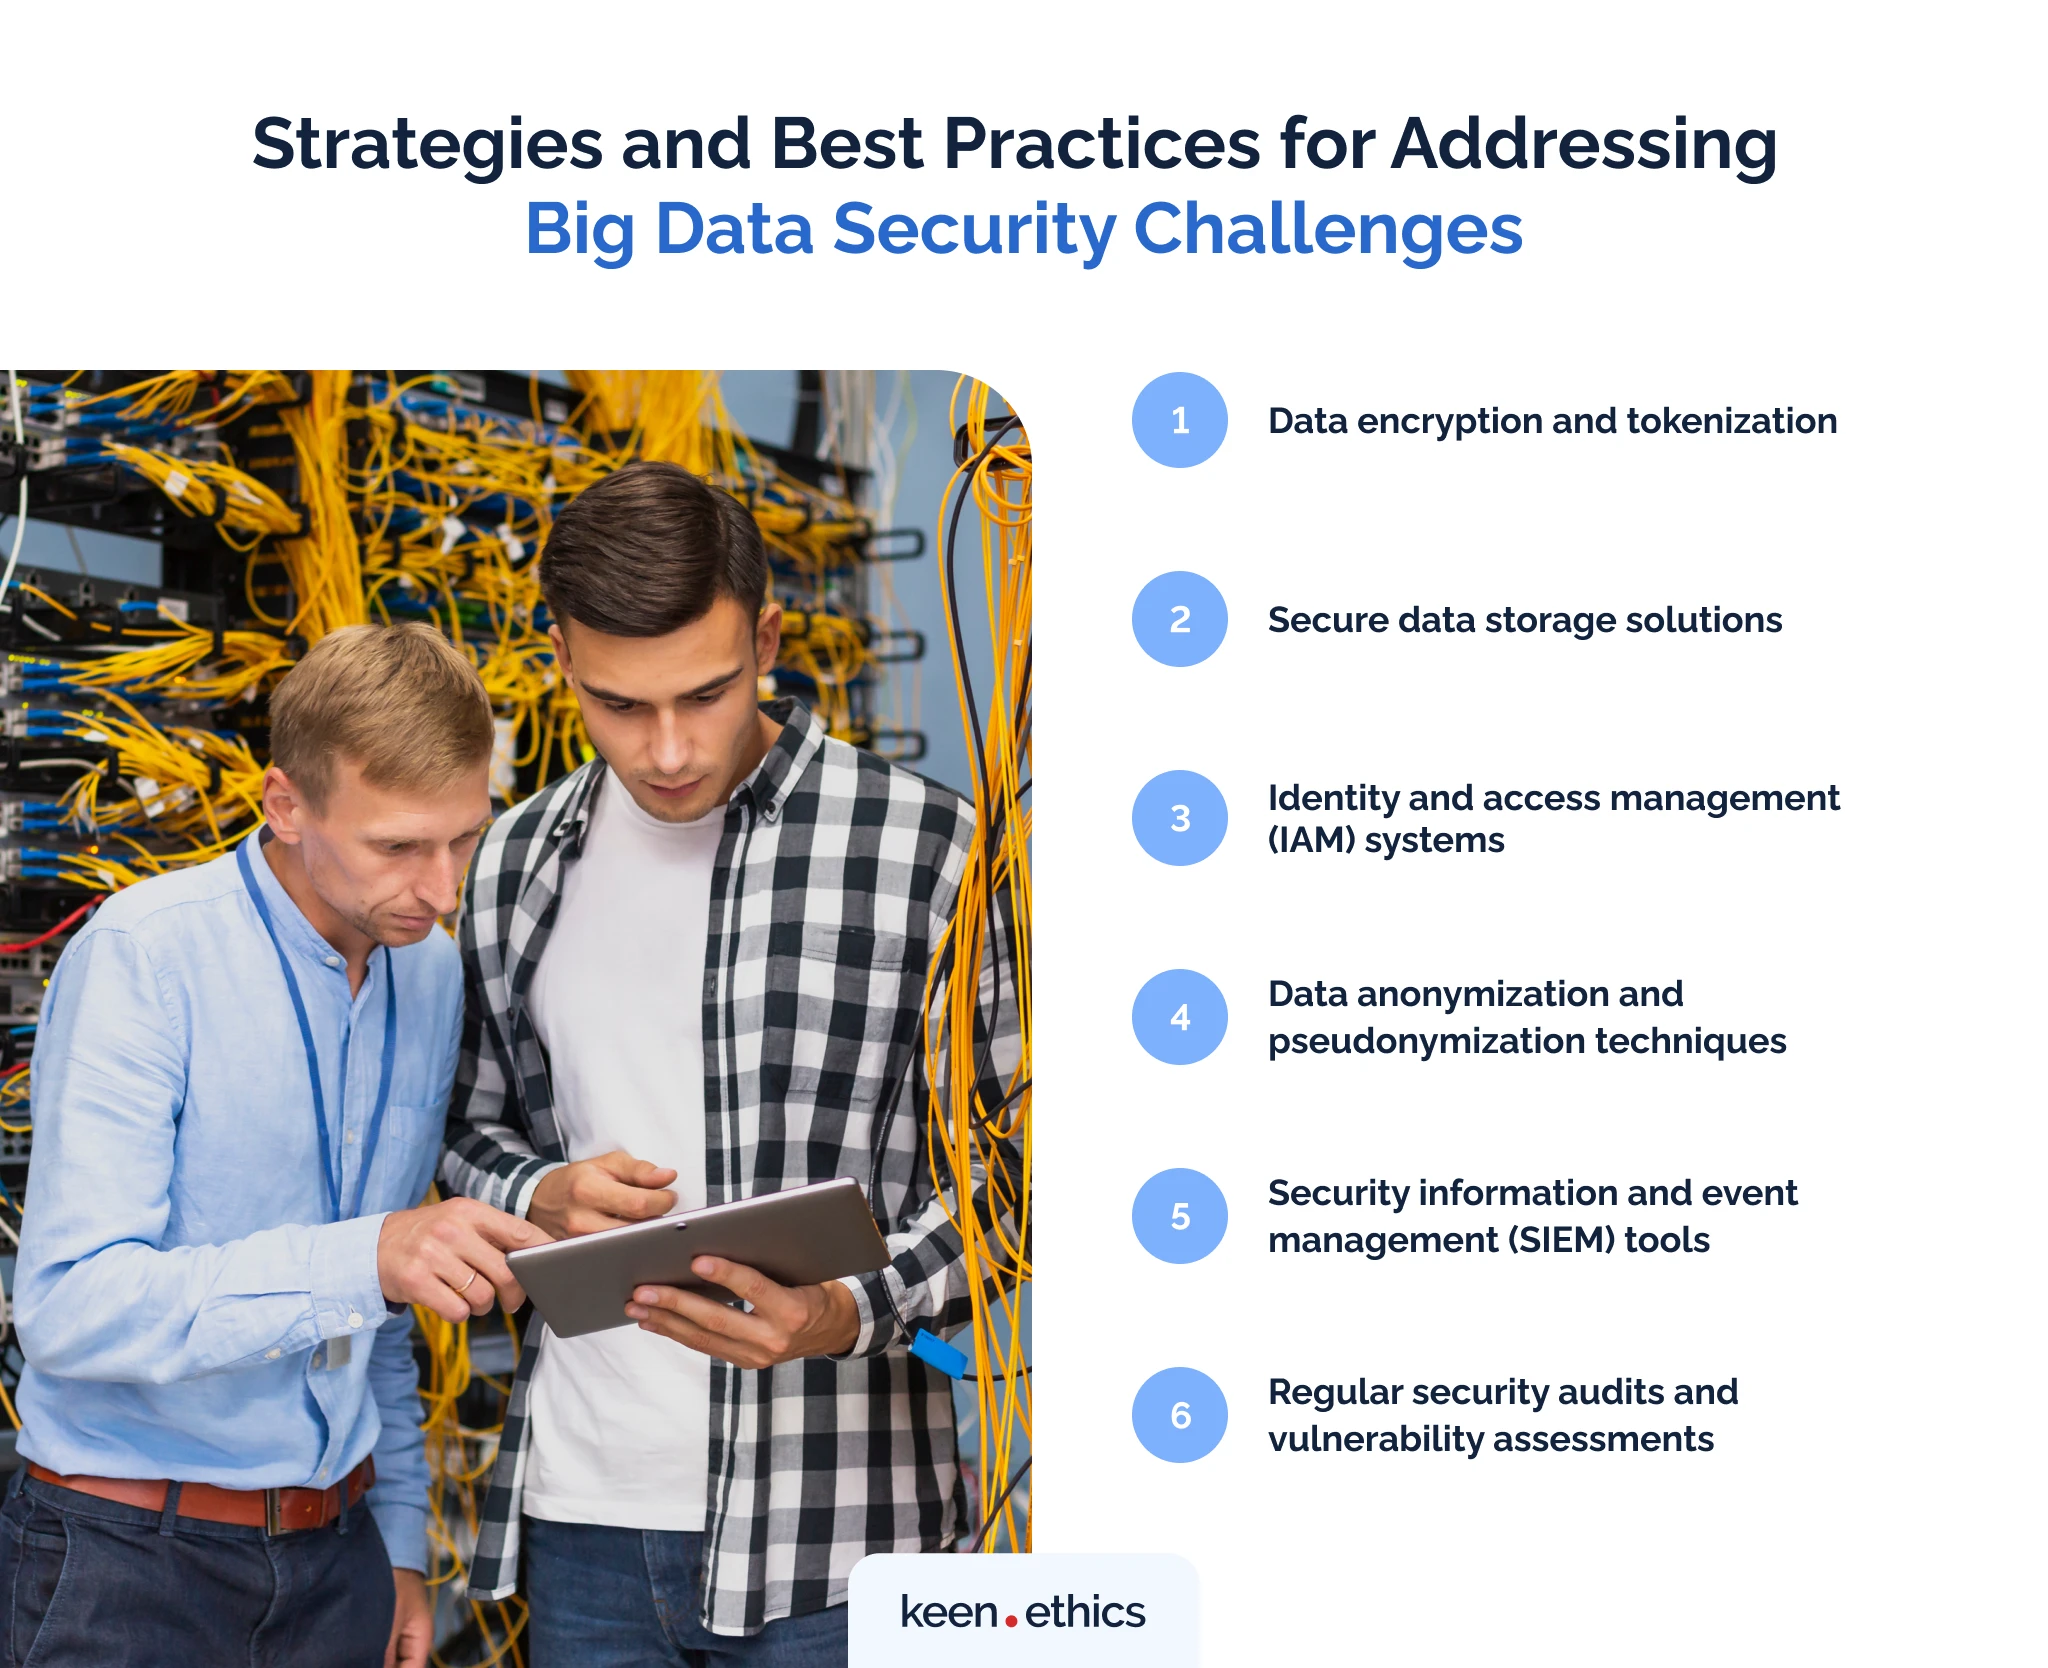 Strategies and best practices for addressing Big Data Security challenges